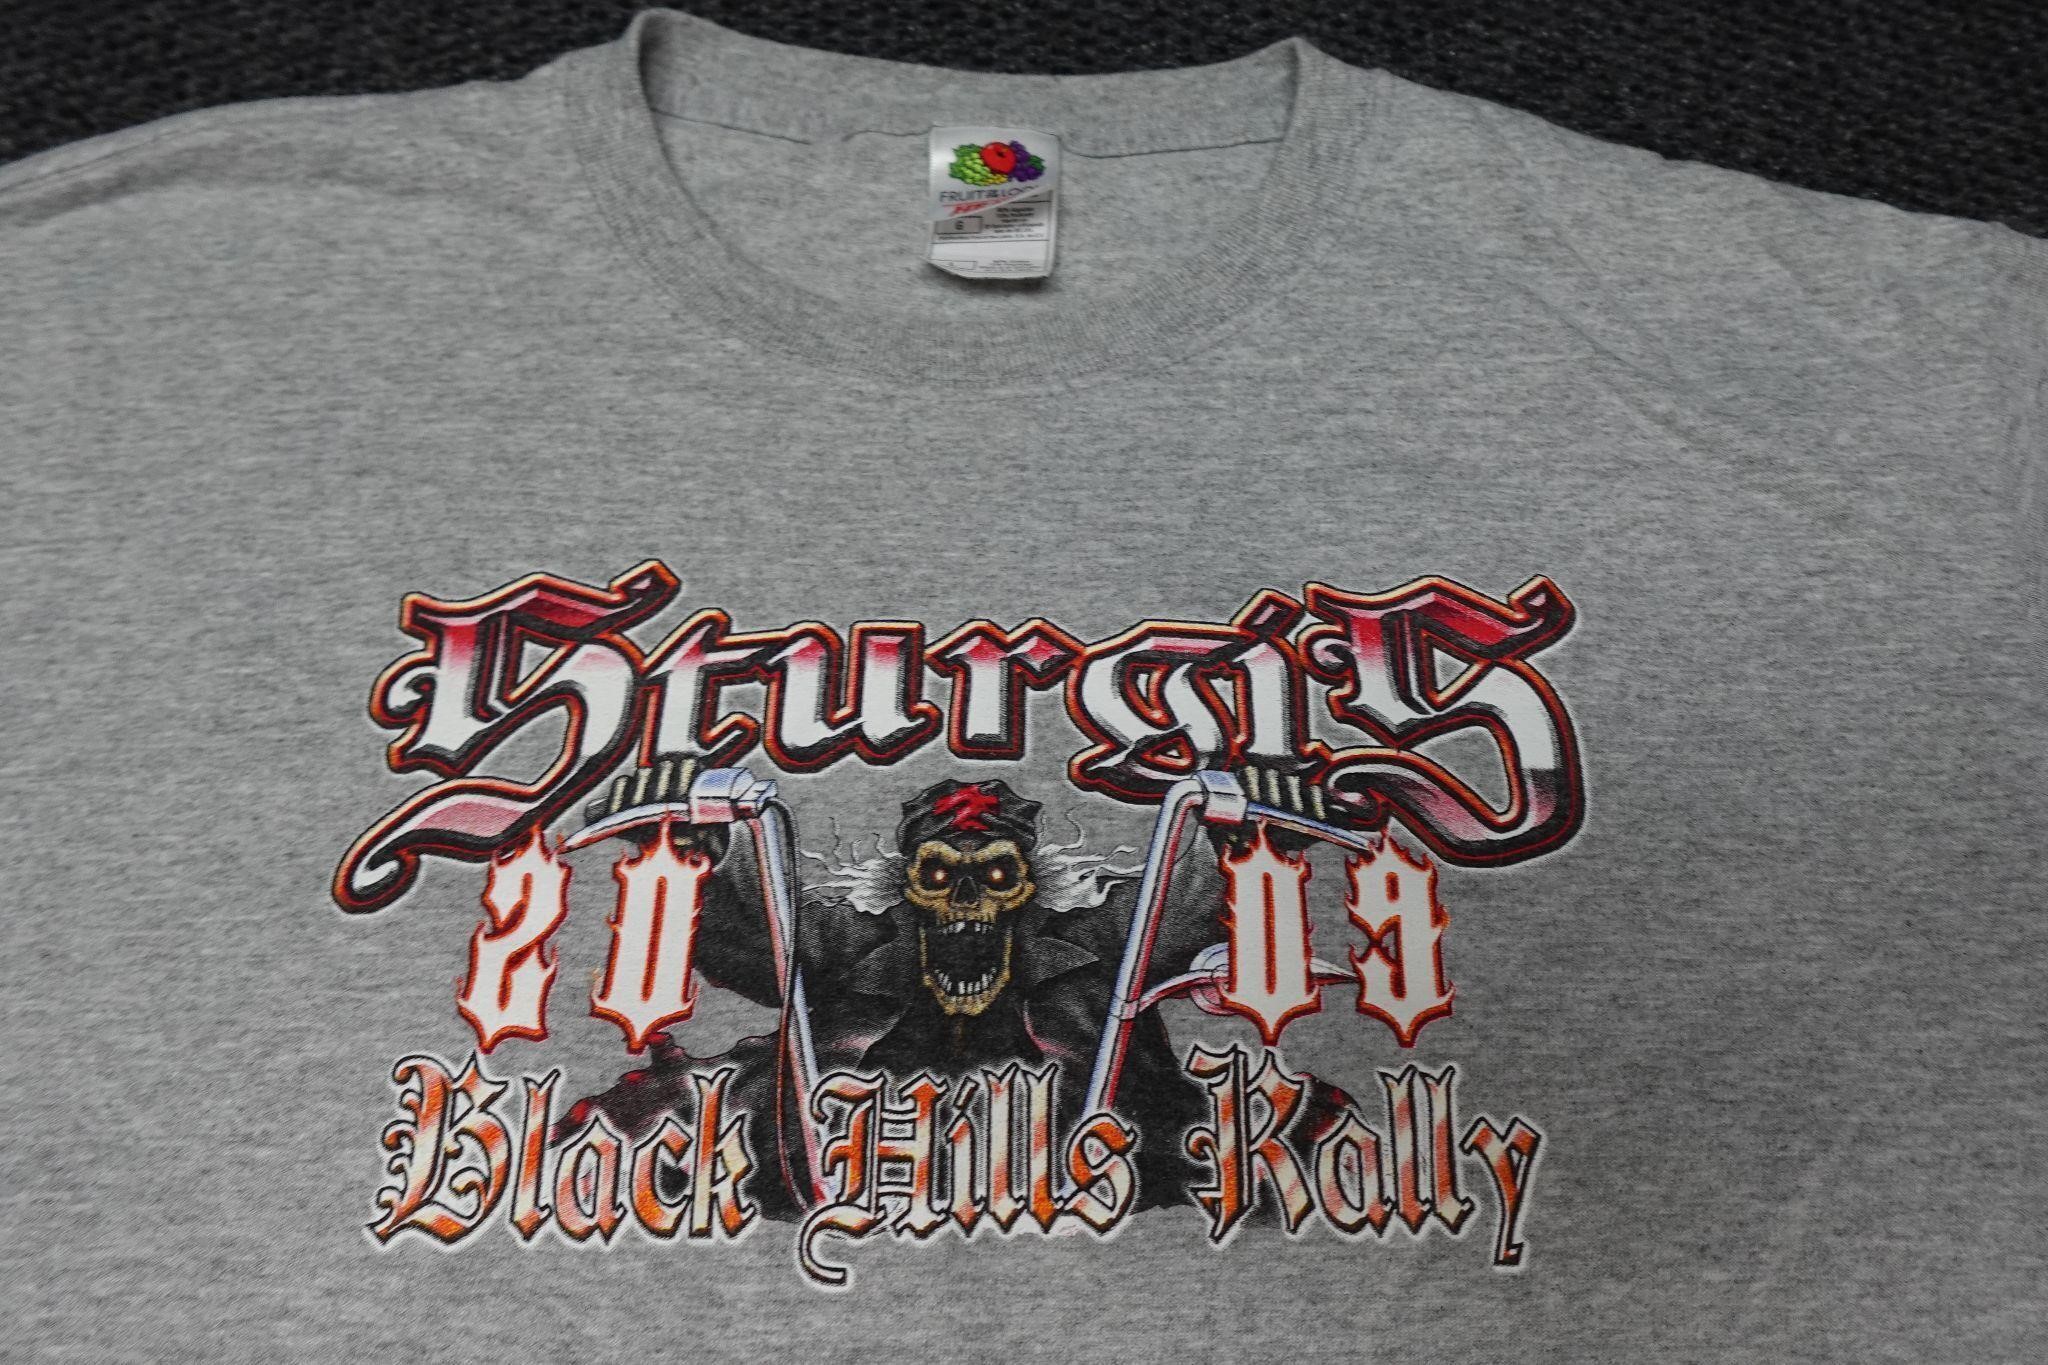 Sturgis 2009 Two-Sided Graphic T-shirt Size Large